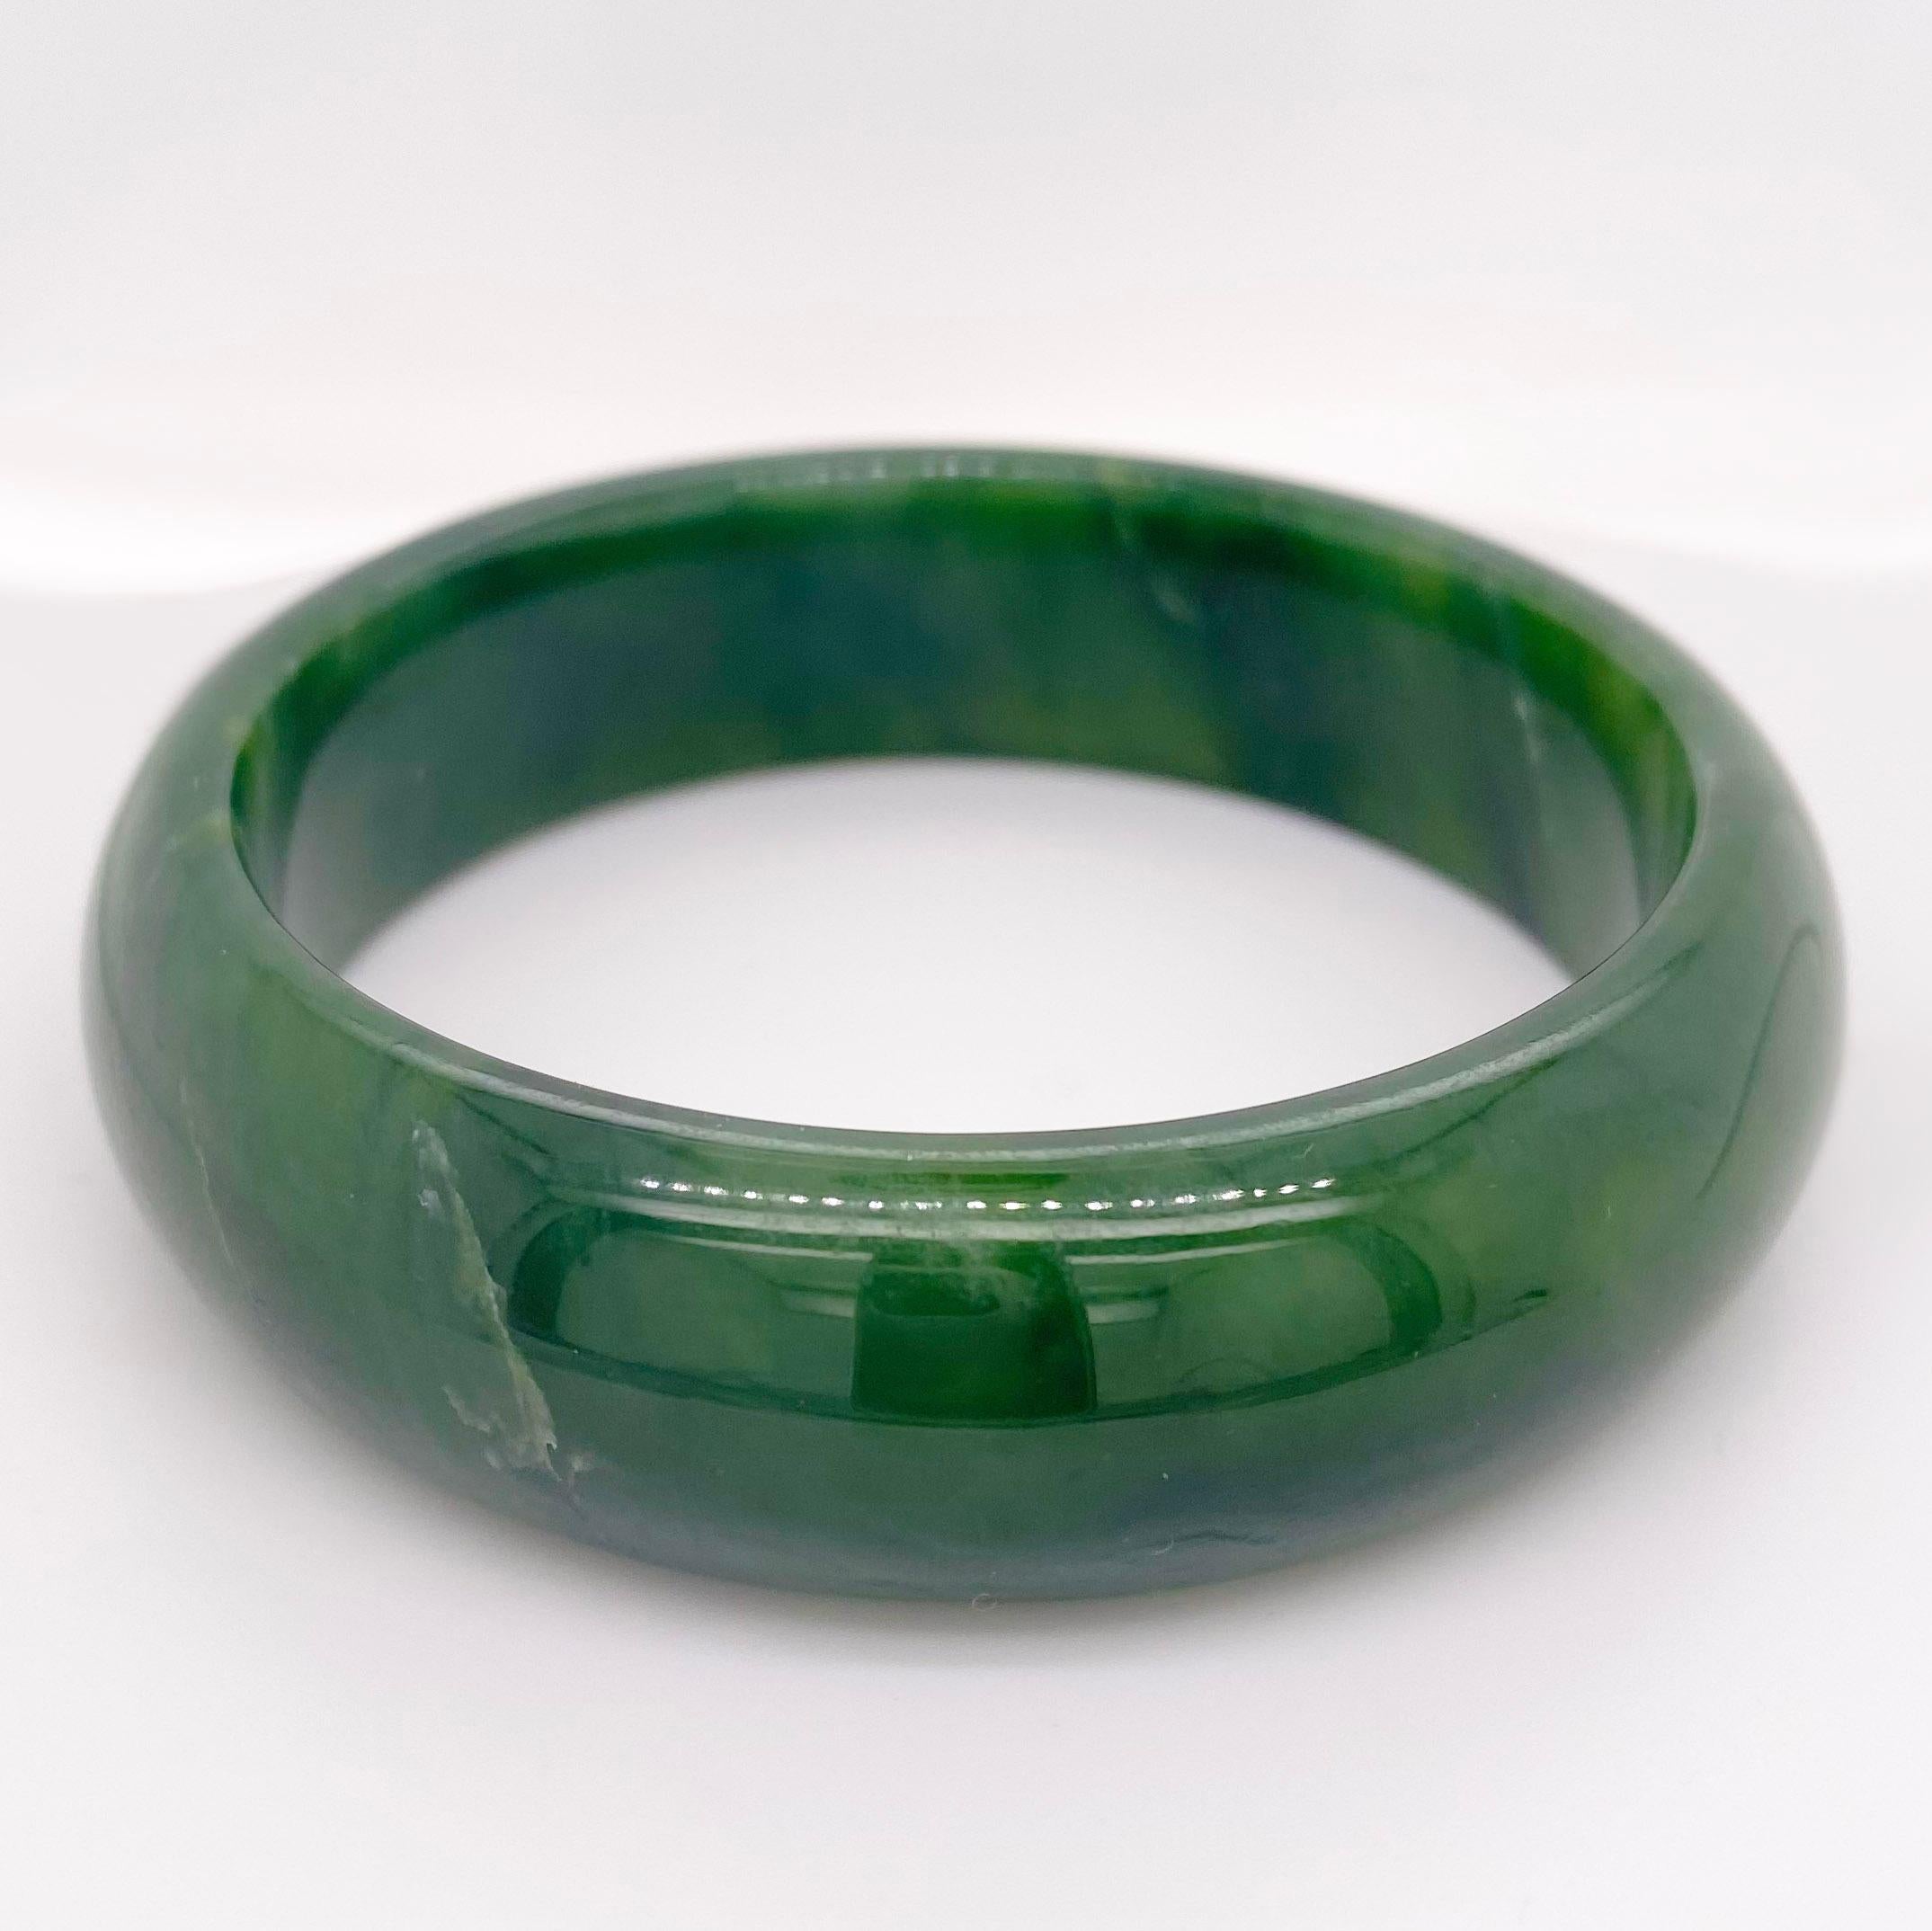 The deep green color of this bracelet is luscious! Genuine jade in this quality is gorgeous and jade is very durable. Many people don’t know that jade is the toughest gemstone and that means it is the hardest to break. It is also extremely difficult